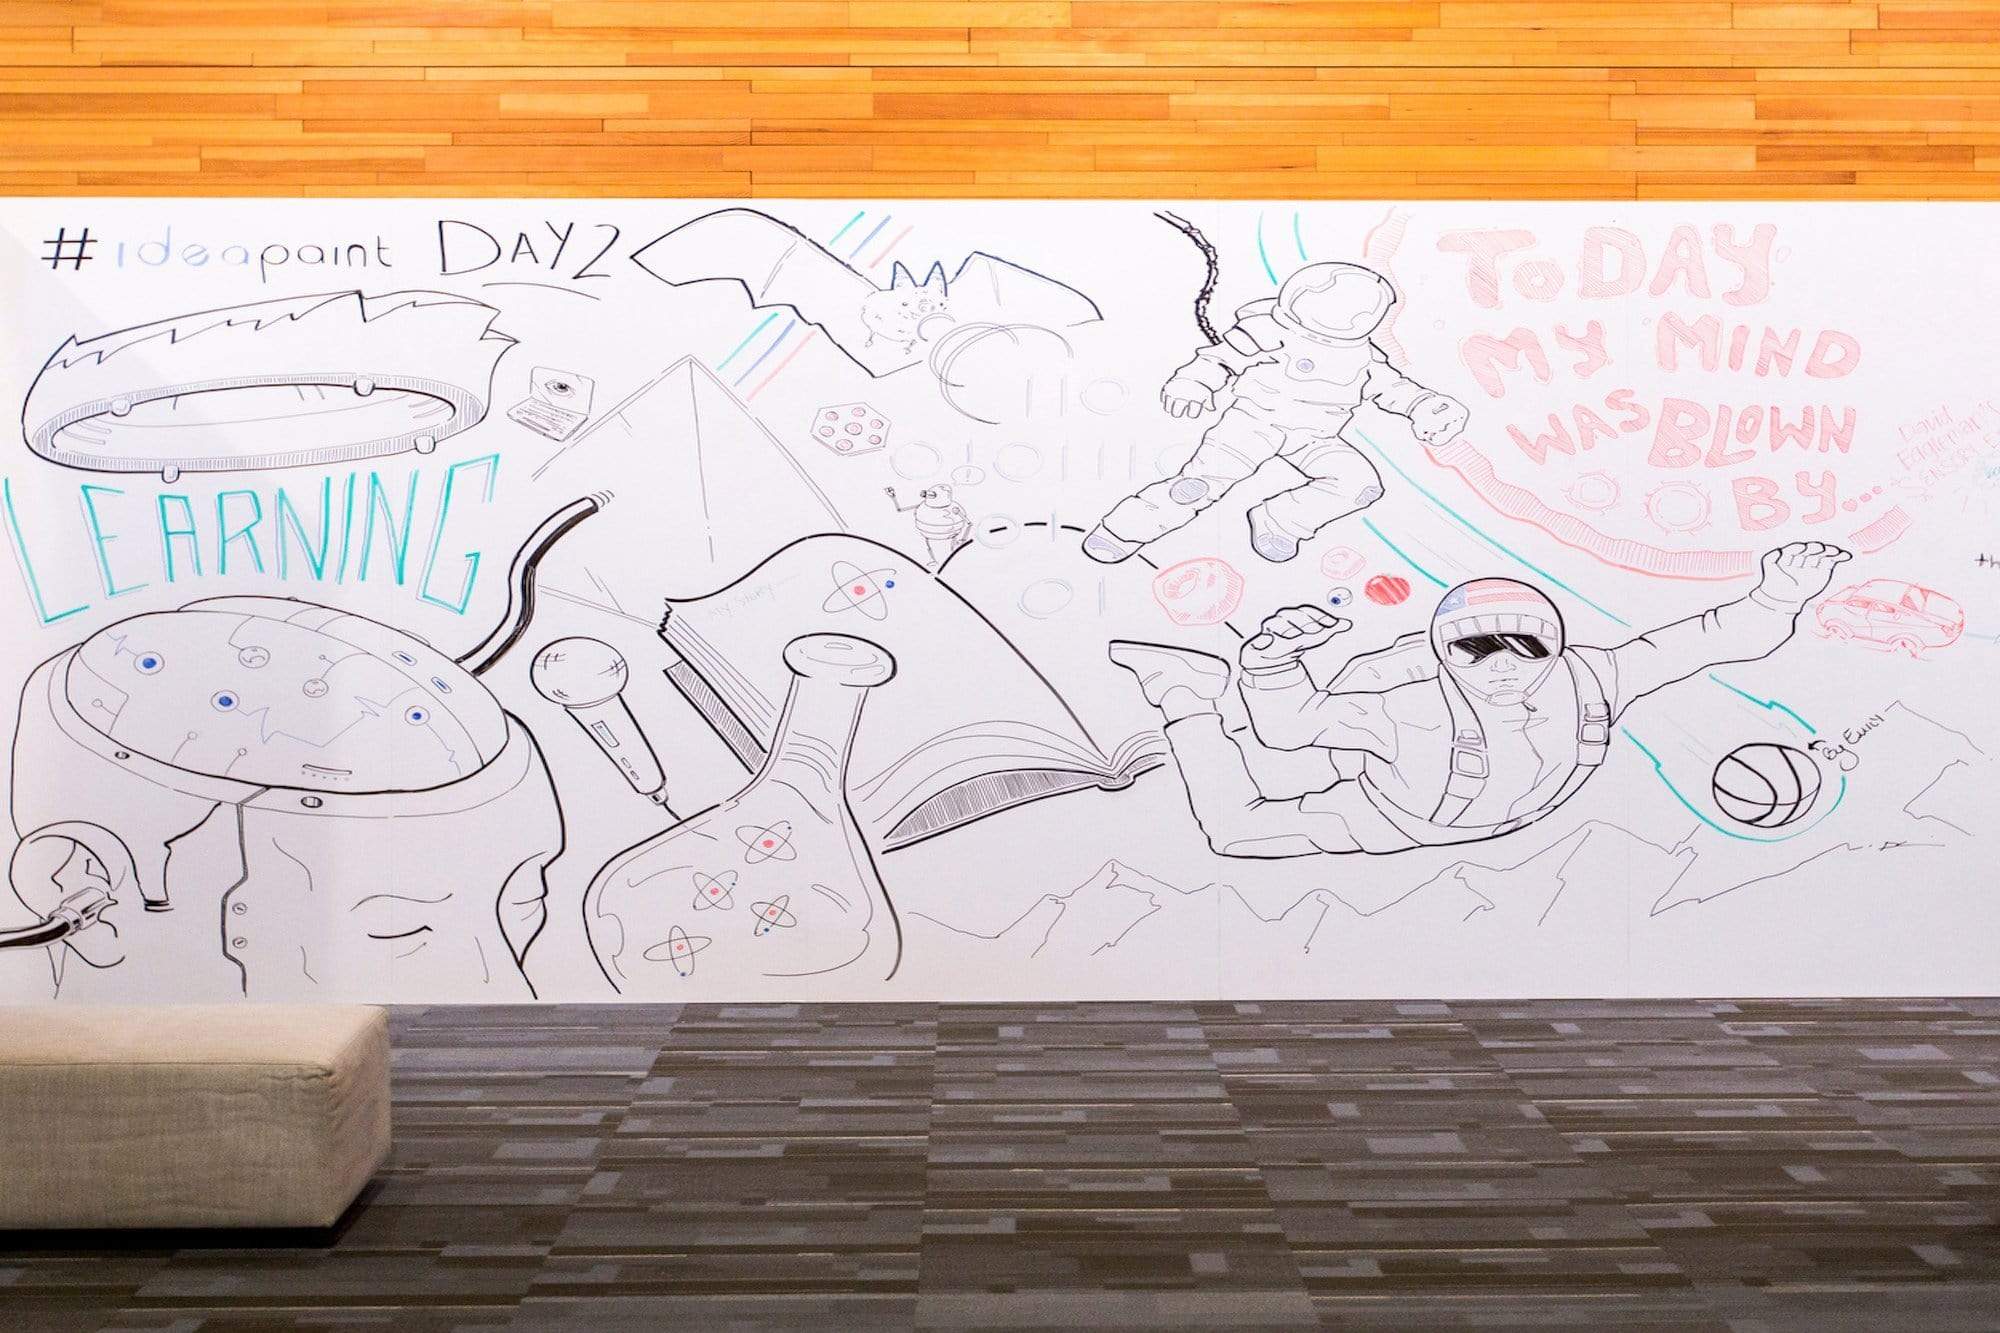 IdeaPaint CREATE White Dry Erase (Whiteboard) Paint Wall Paint